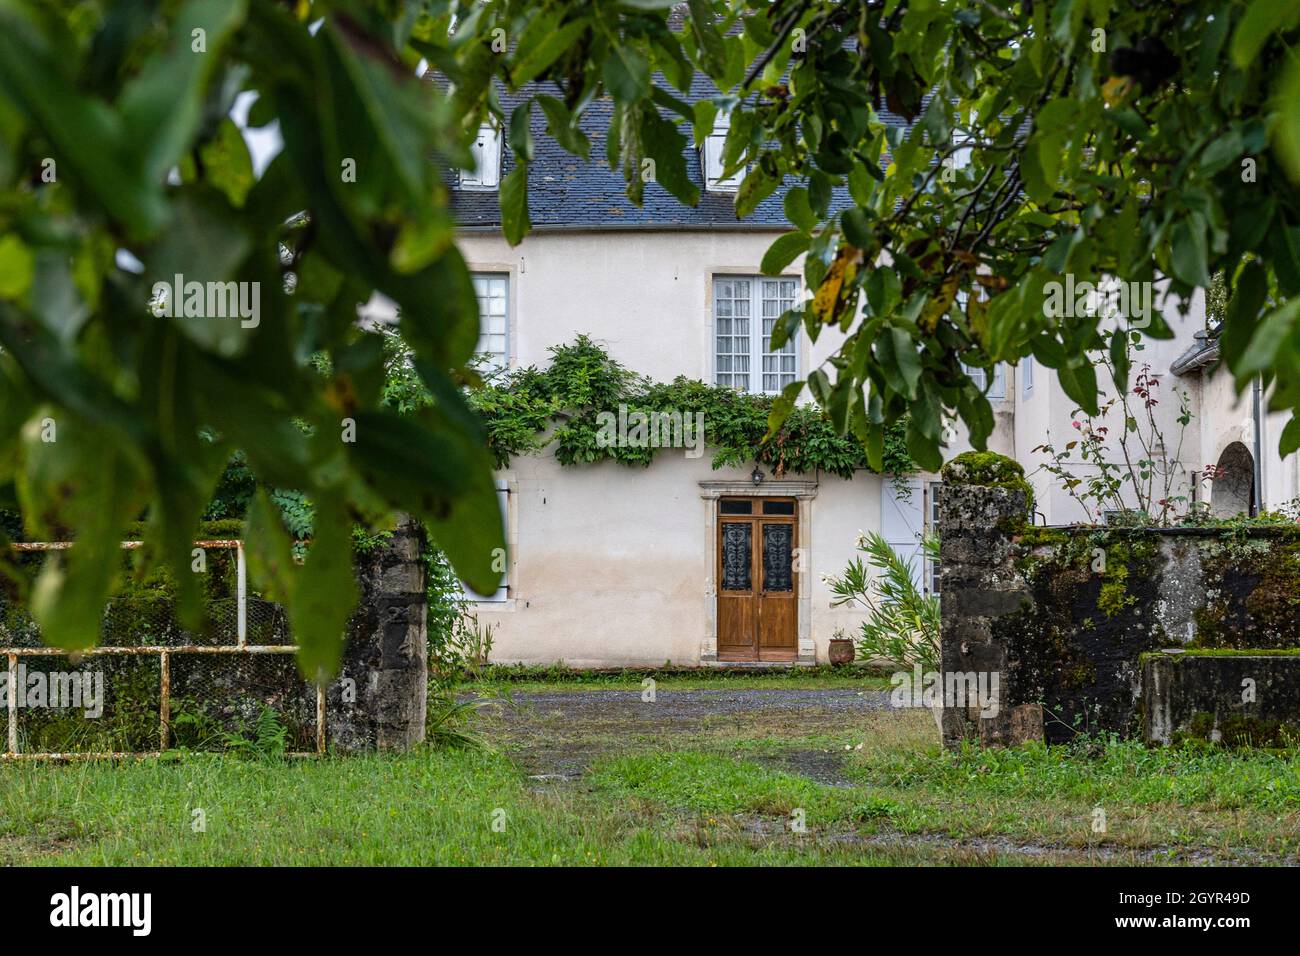 A typical winemaker's home in the Jurançon's wine growing area near La Chapelle de Rousse, Béarn, France Stock Photo